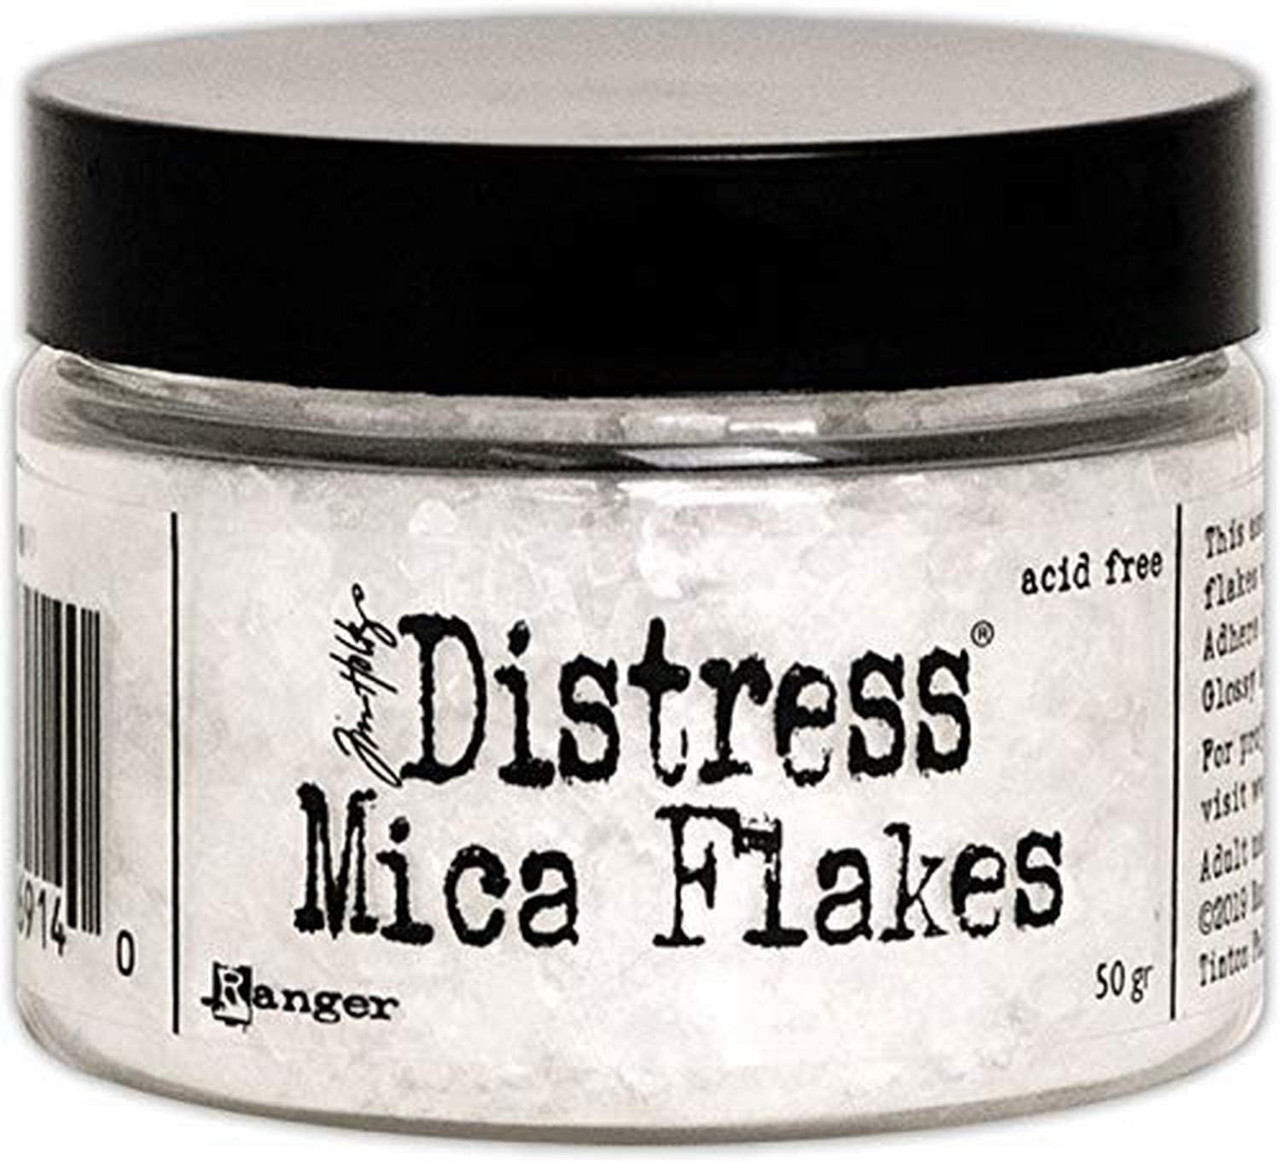 Mica Flakes- Coarse – Art Makers Makery